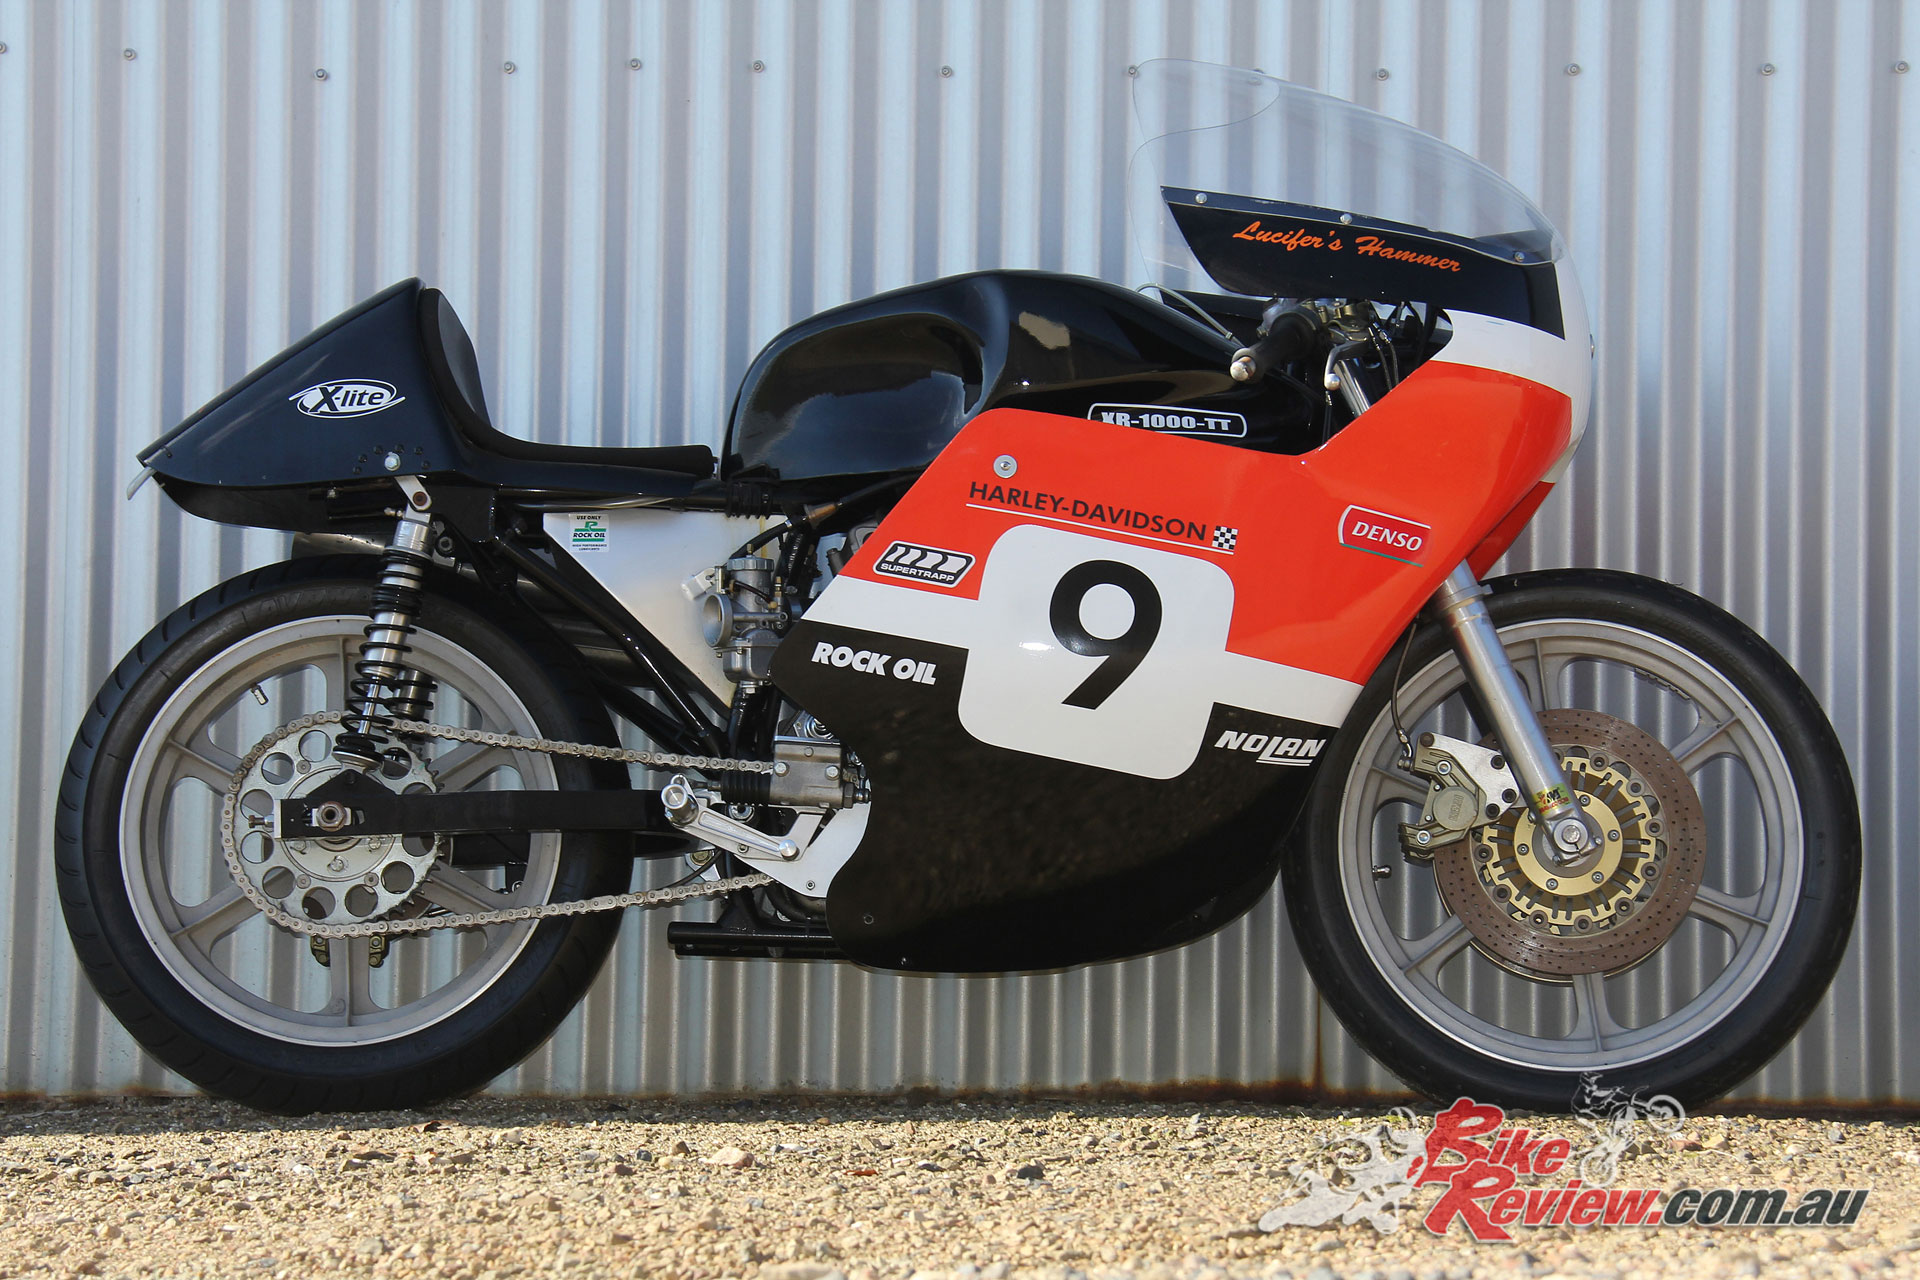 The XR 1000 in racing trim